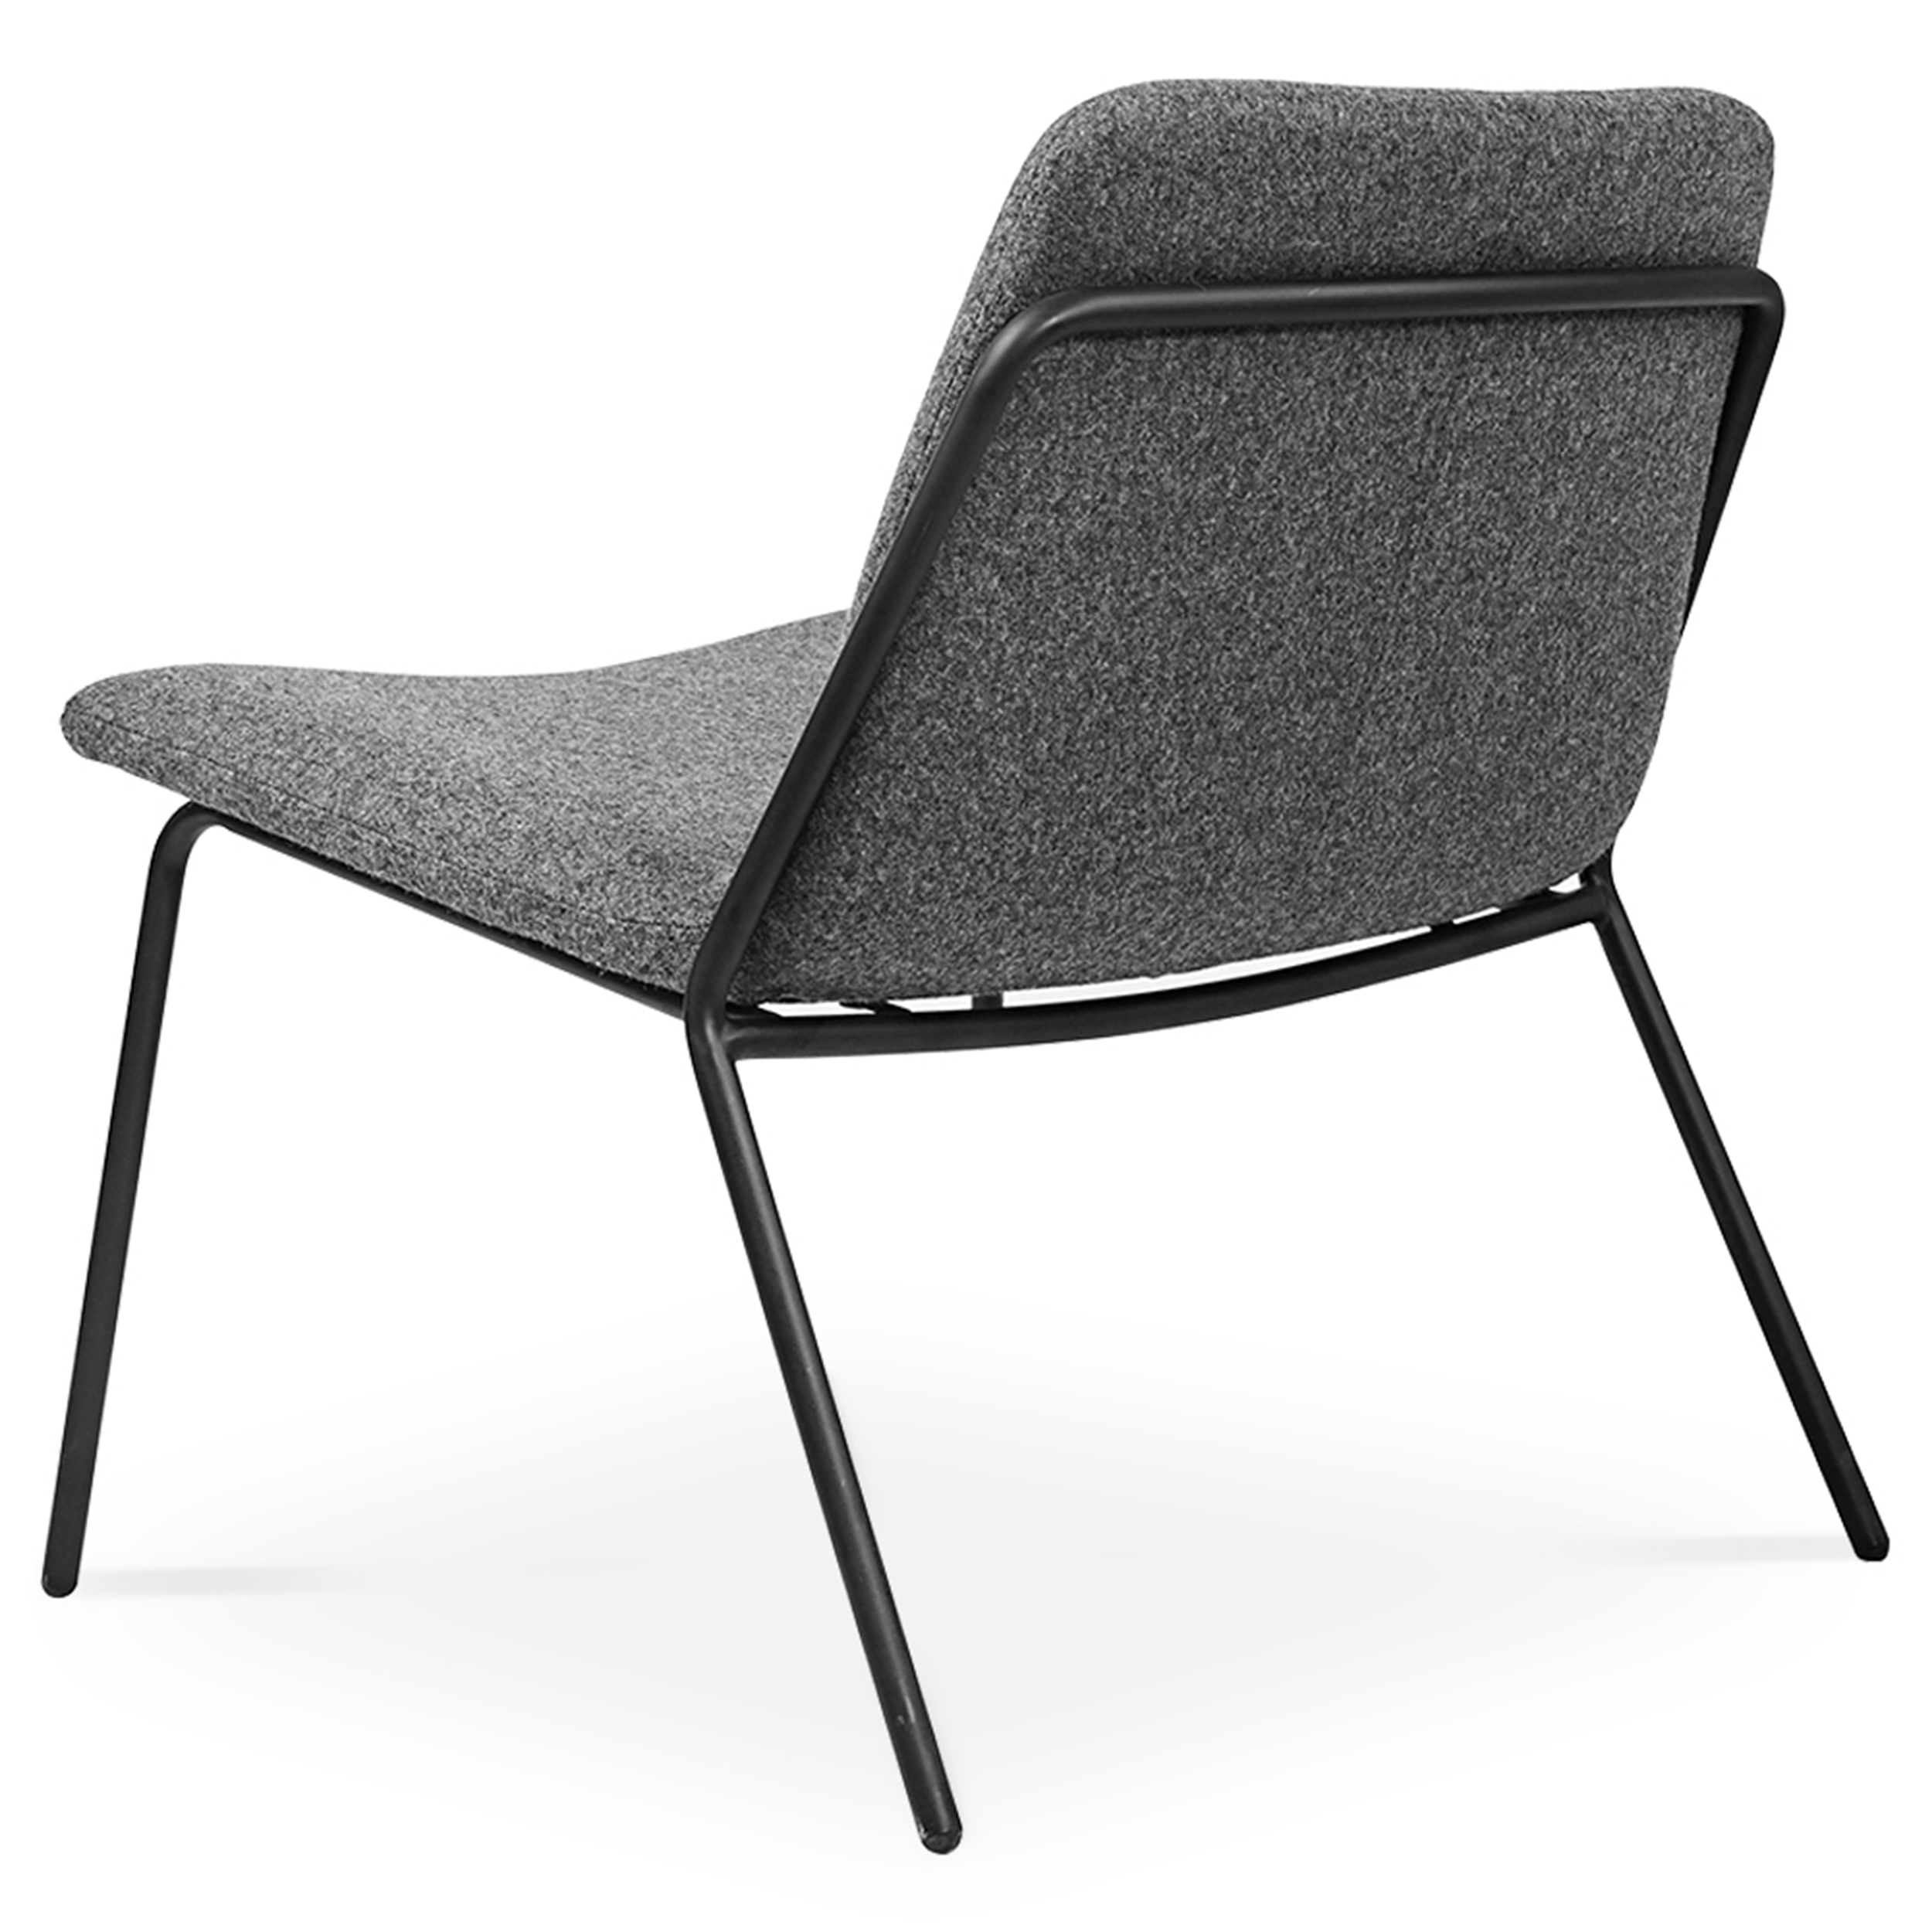 WS - Sling lounge chair - Upholstered dark grey (Back angle)